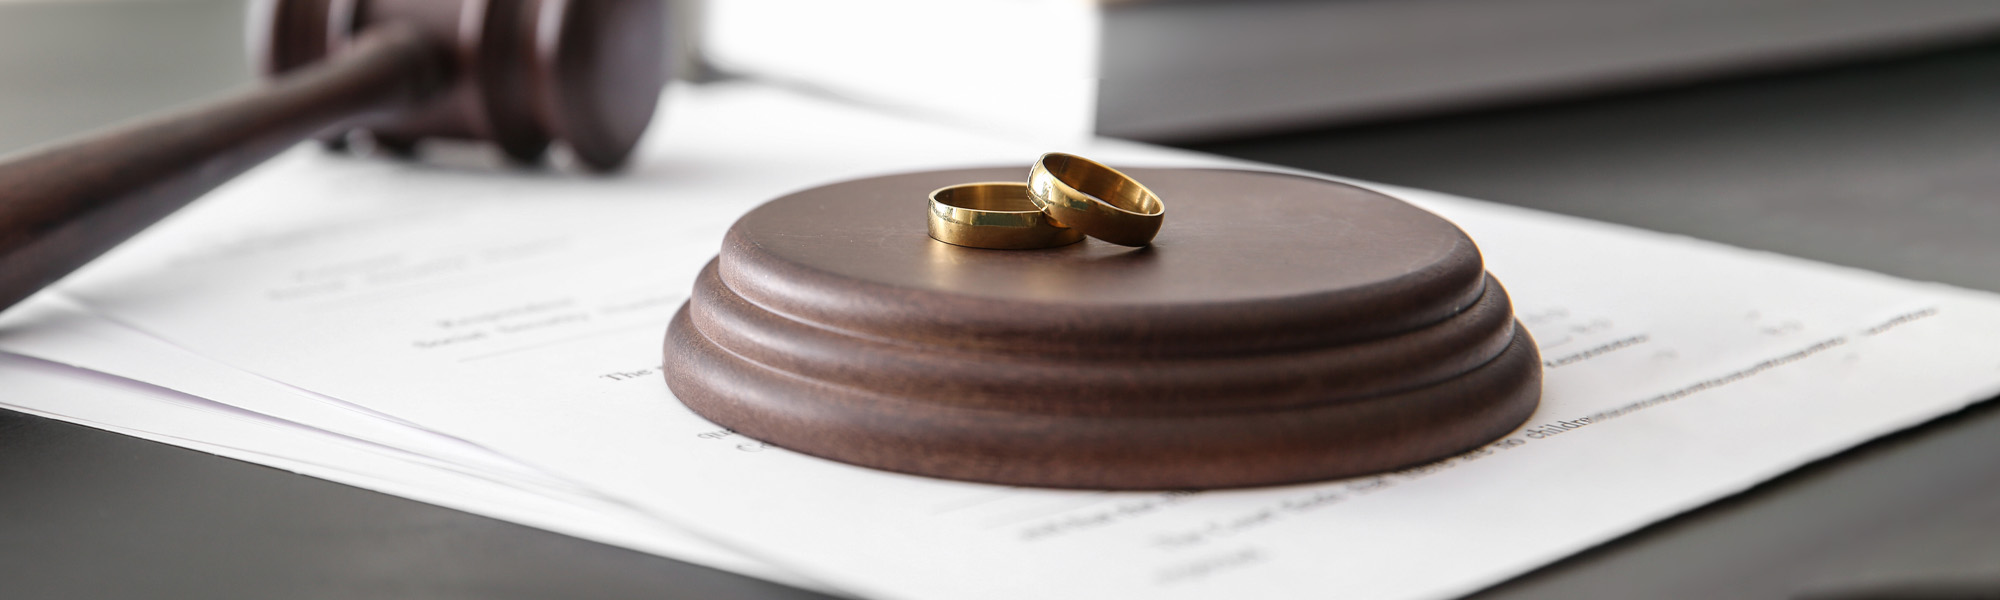 A pair of wedding rings rests atop legal documents related to domestic identity theft next to a judge's gavel, suggesting the context of a divorce or marriage dissolution proceeding.